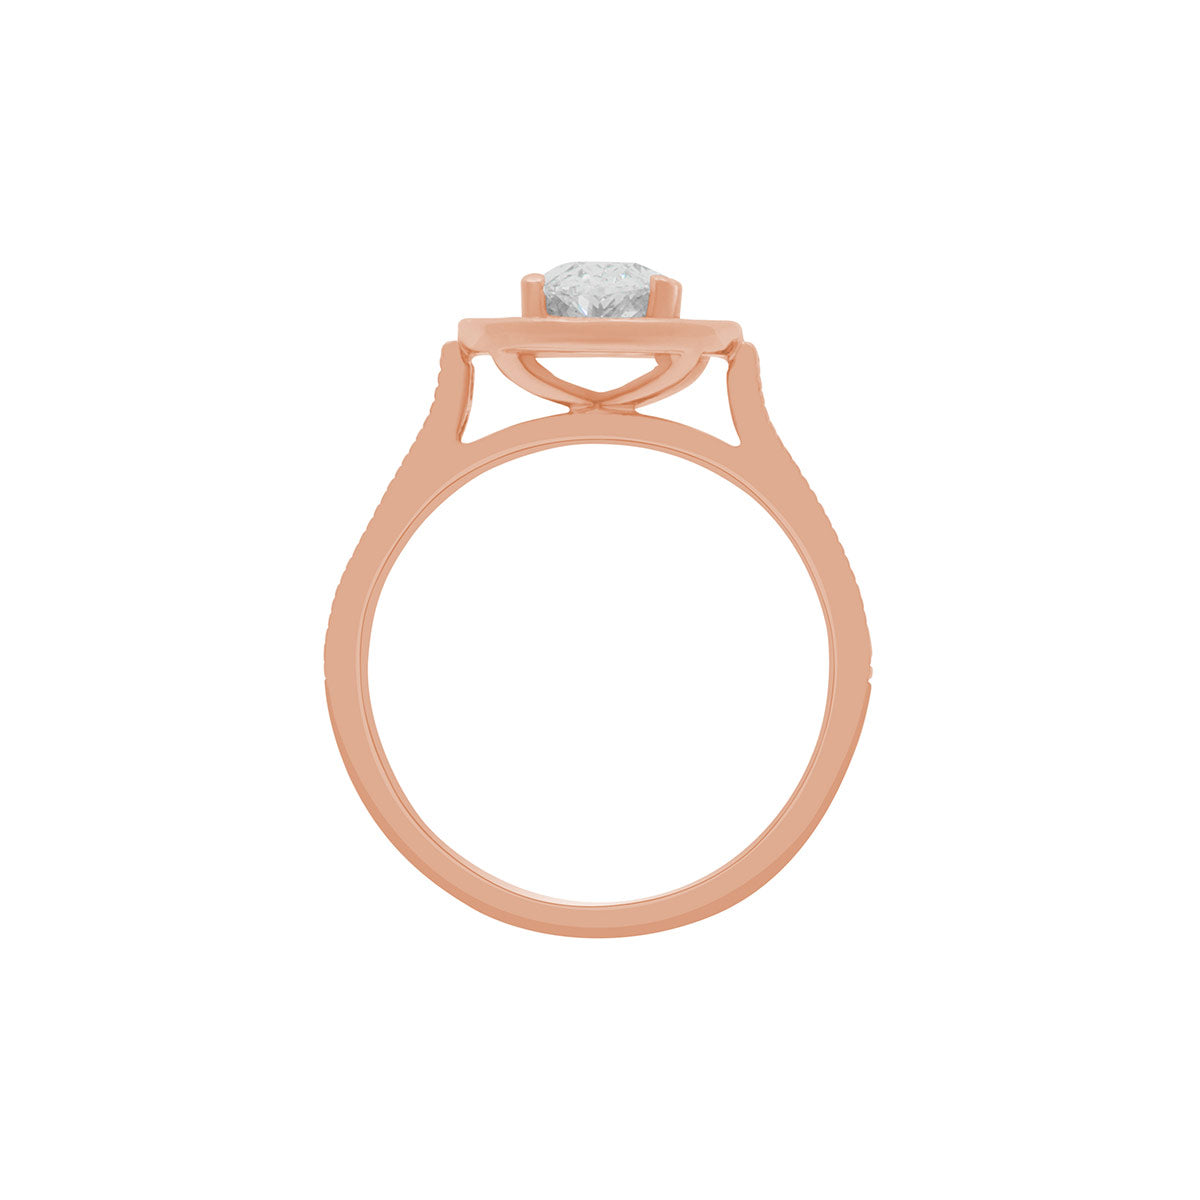 Antique Oval Engagement Ring in rose gold in an upright position